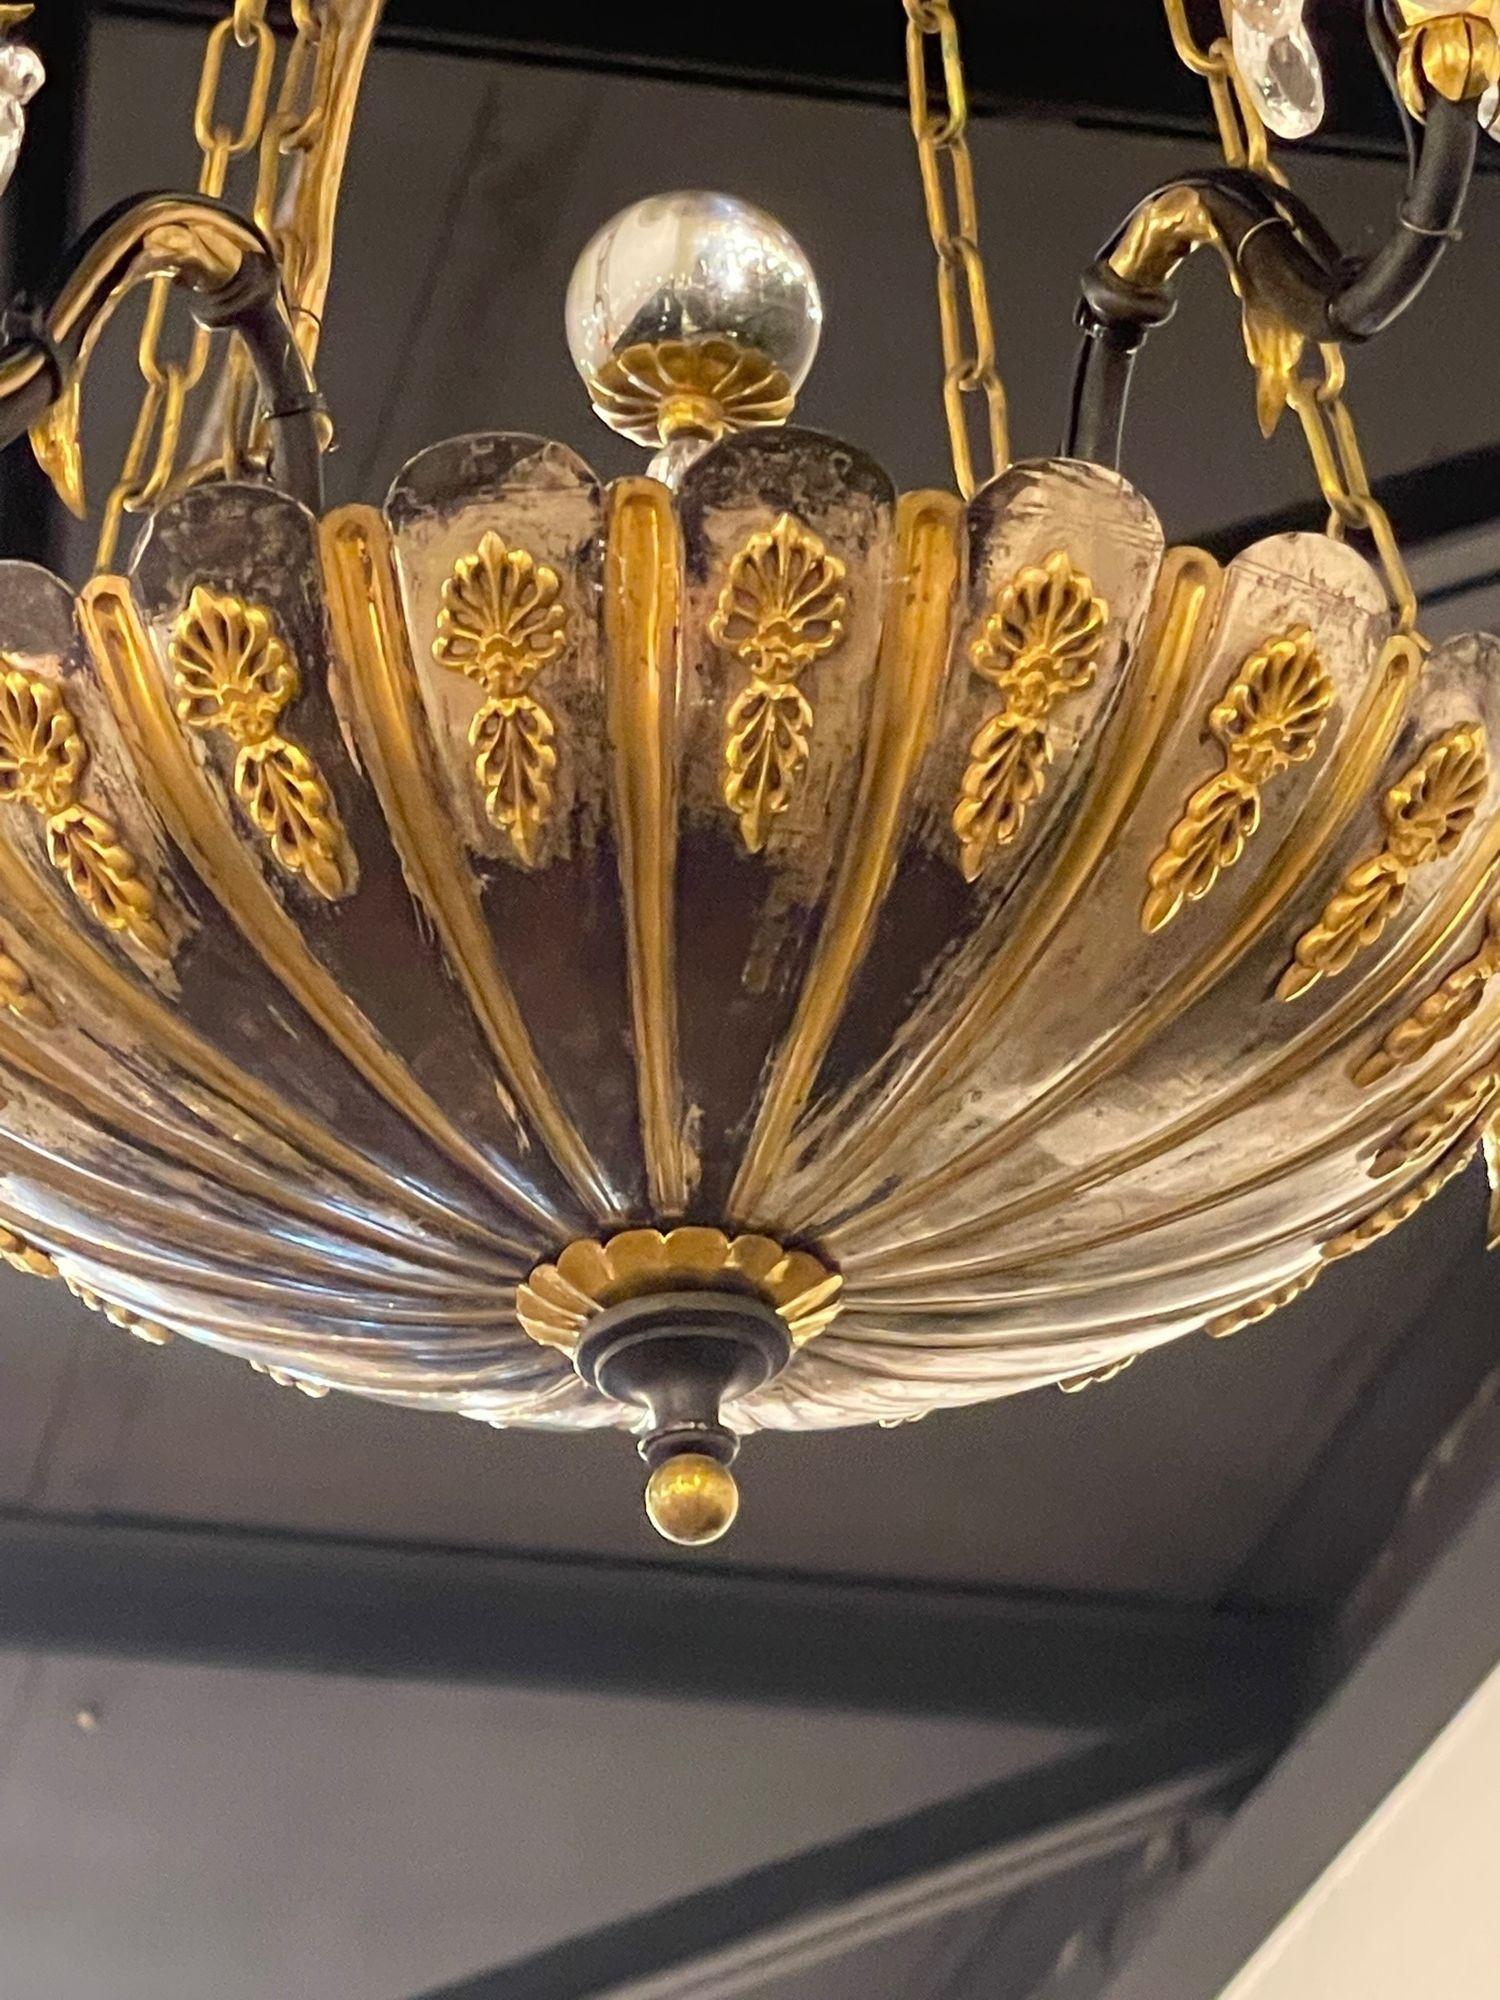 Very fine 19th century English silver and bronze 7 light chandelier. This fixture has a beautiful decorative design and lovely curved arms along with crystals on the lights and at the top. A decorative chandelier that adds a real touch of class!